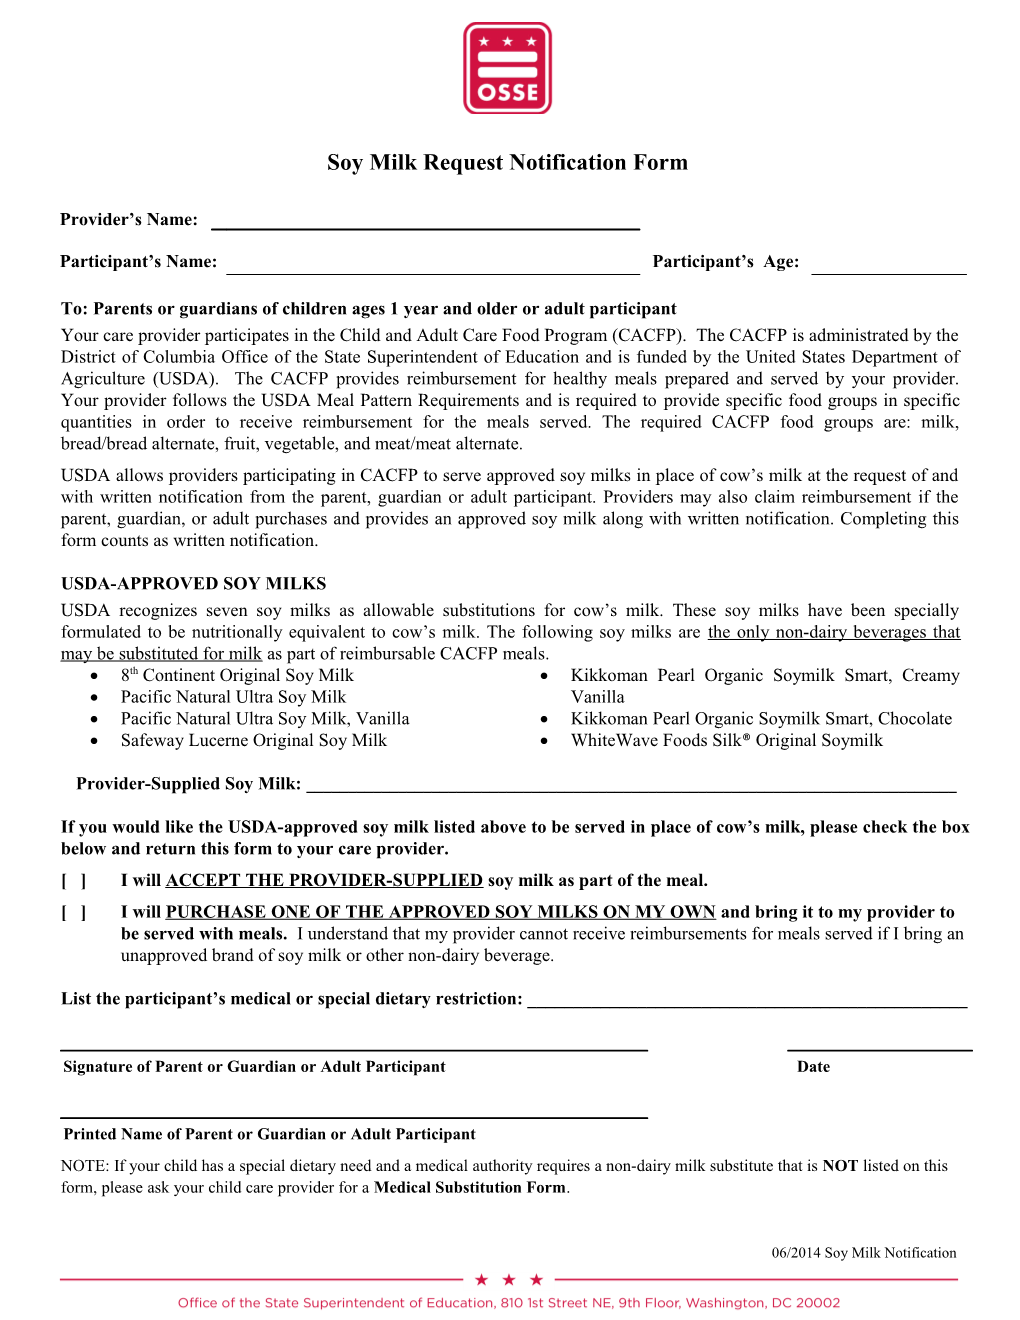 Soy Milk Request Notification Form